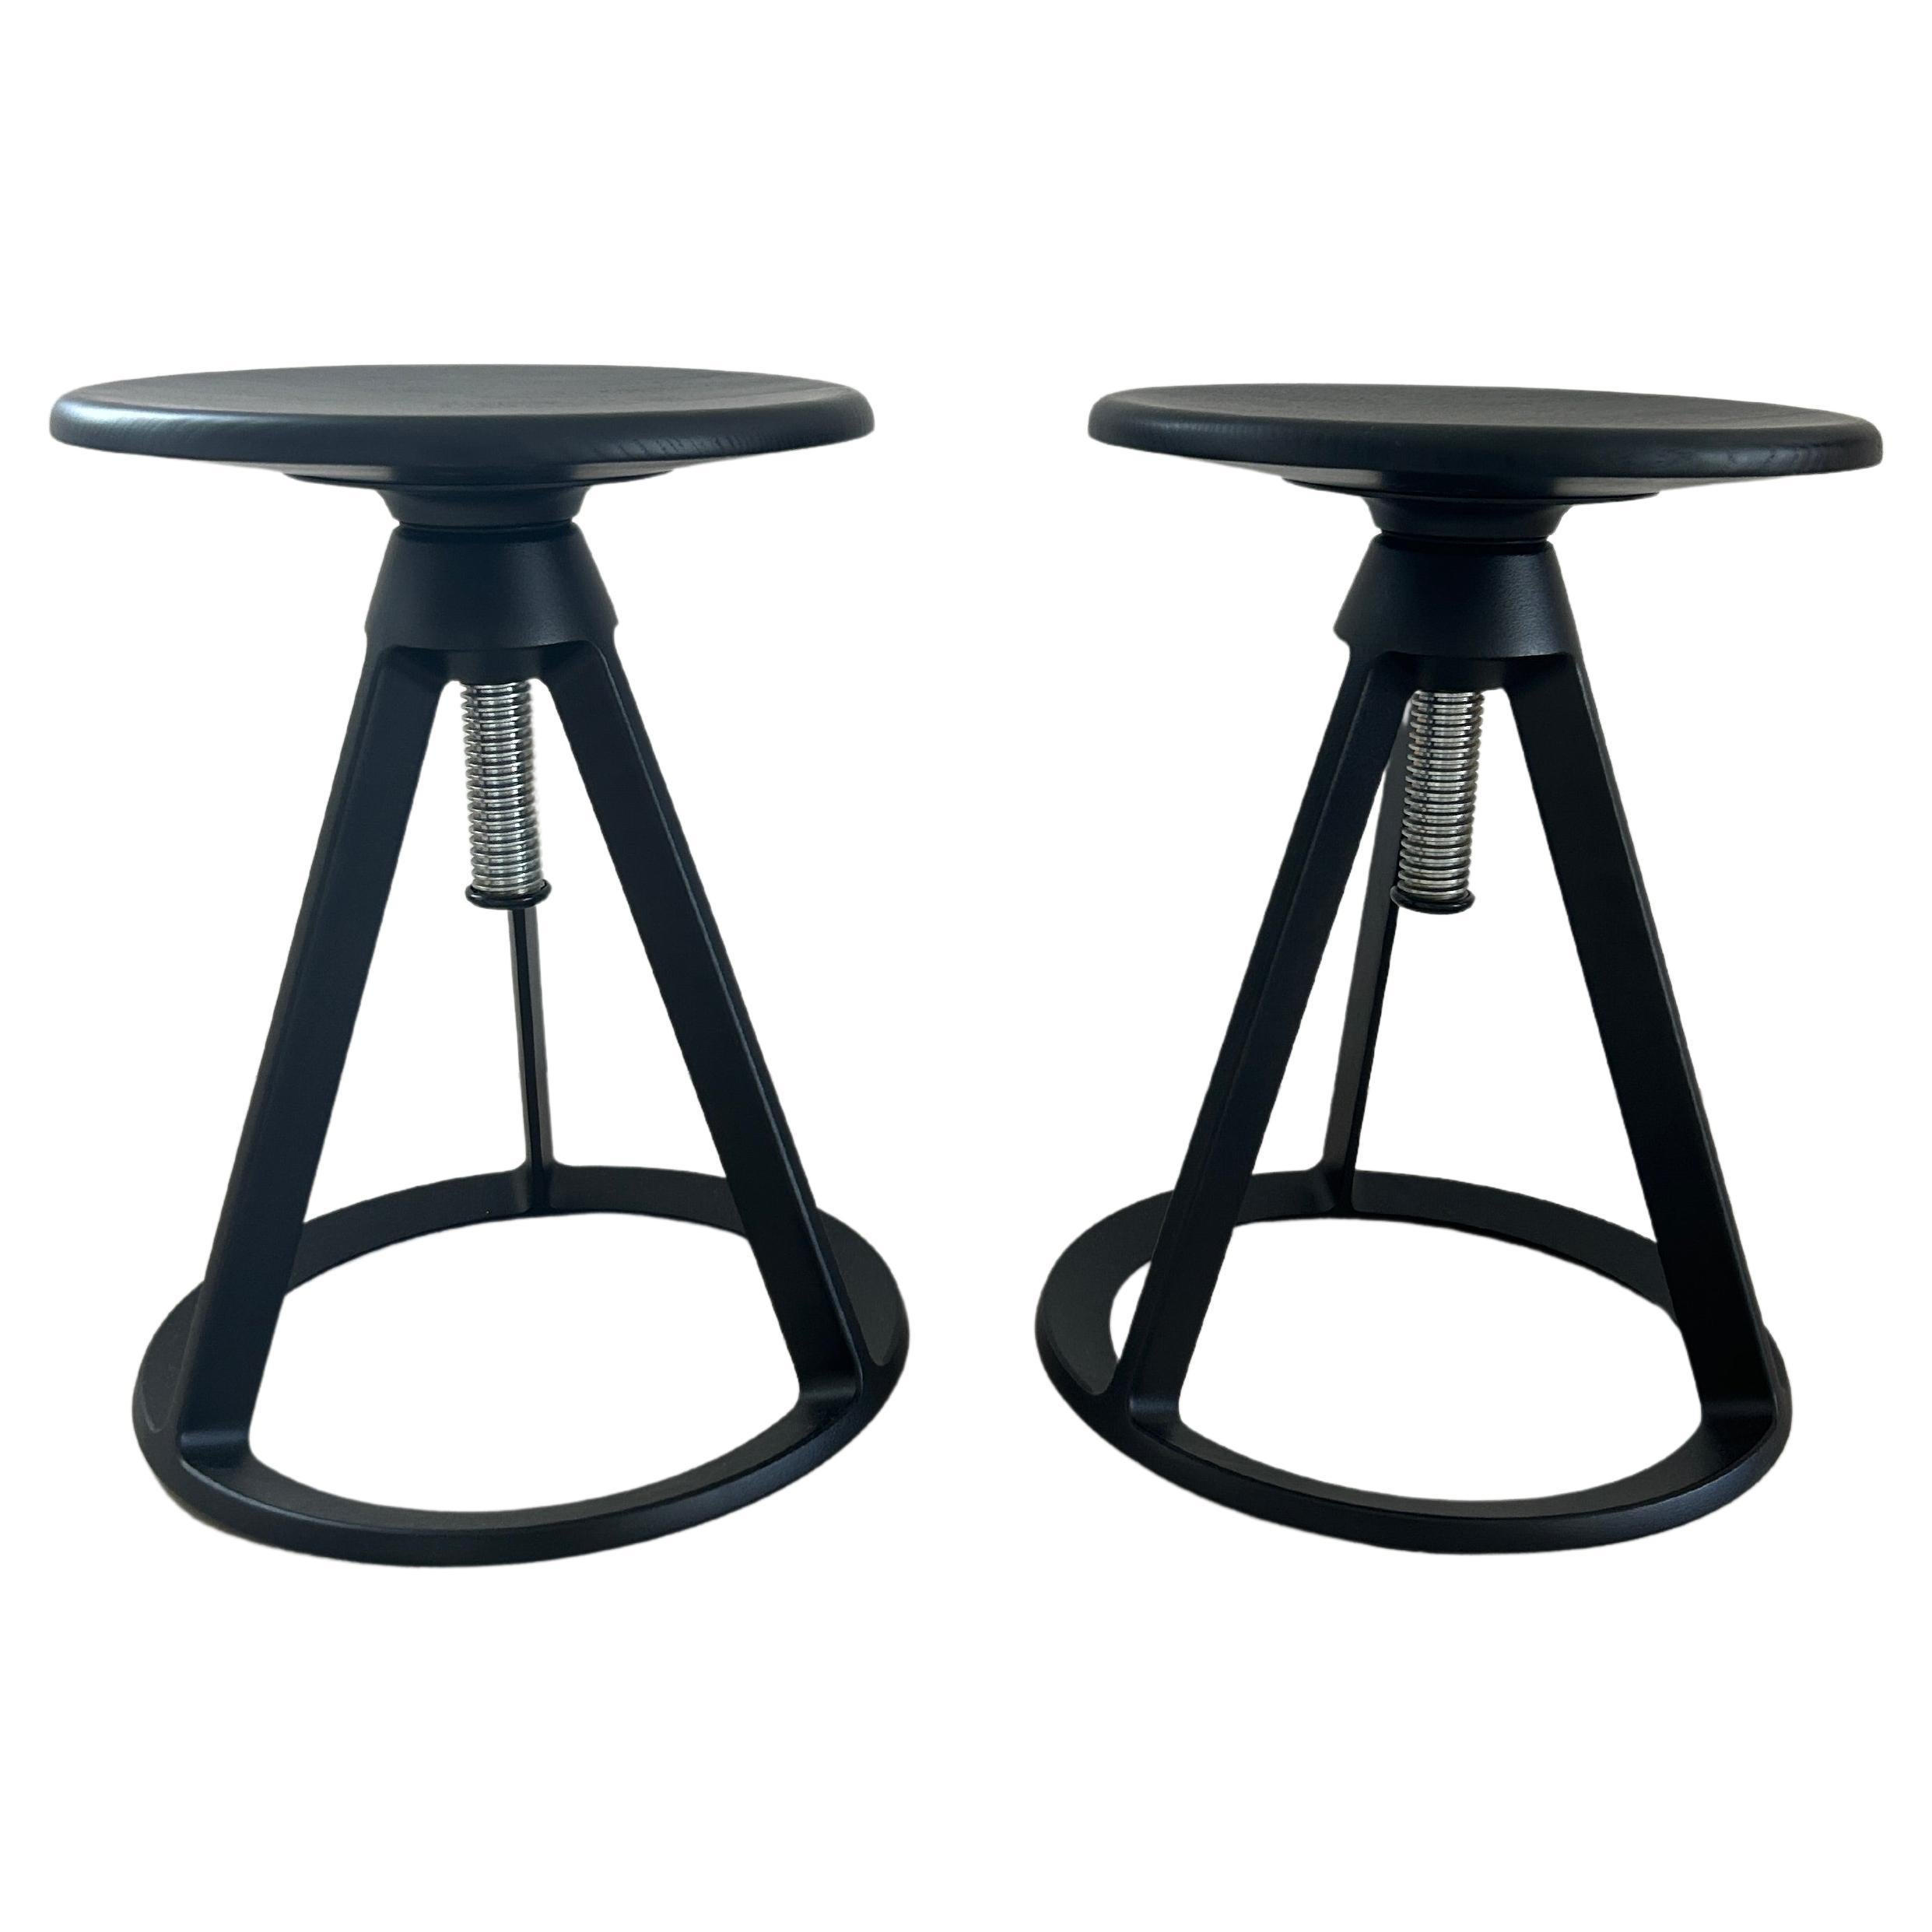 Pair of Modern Edward Barber and Jay Osgerby for Knoll Piton Stools Black For Sale